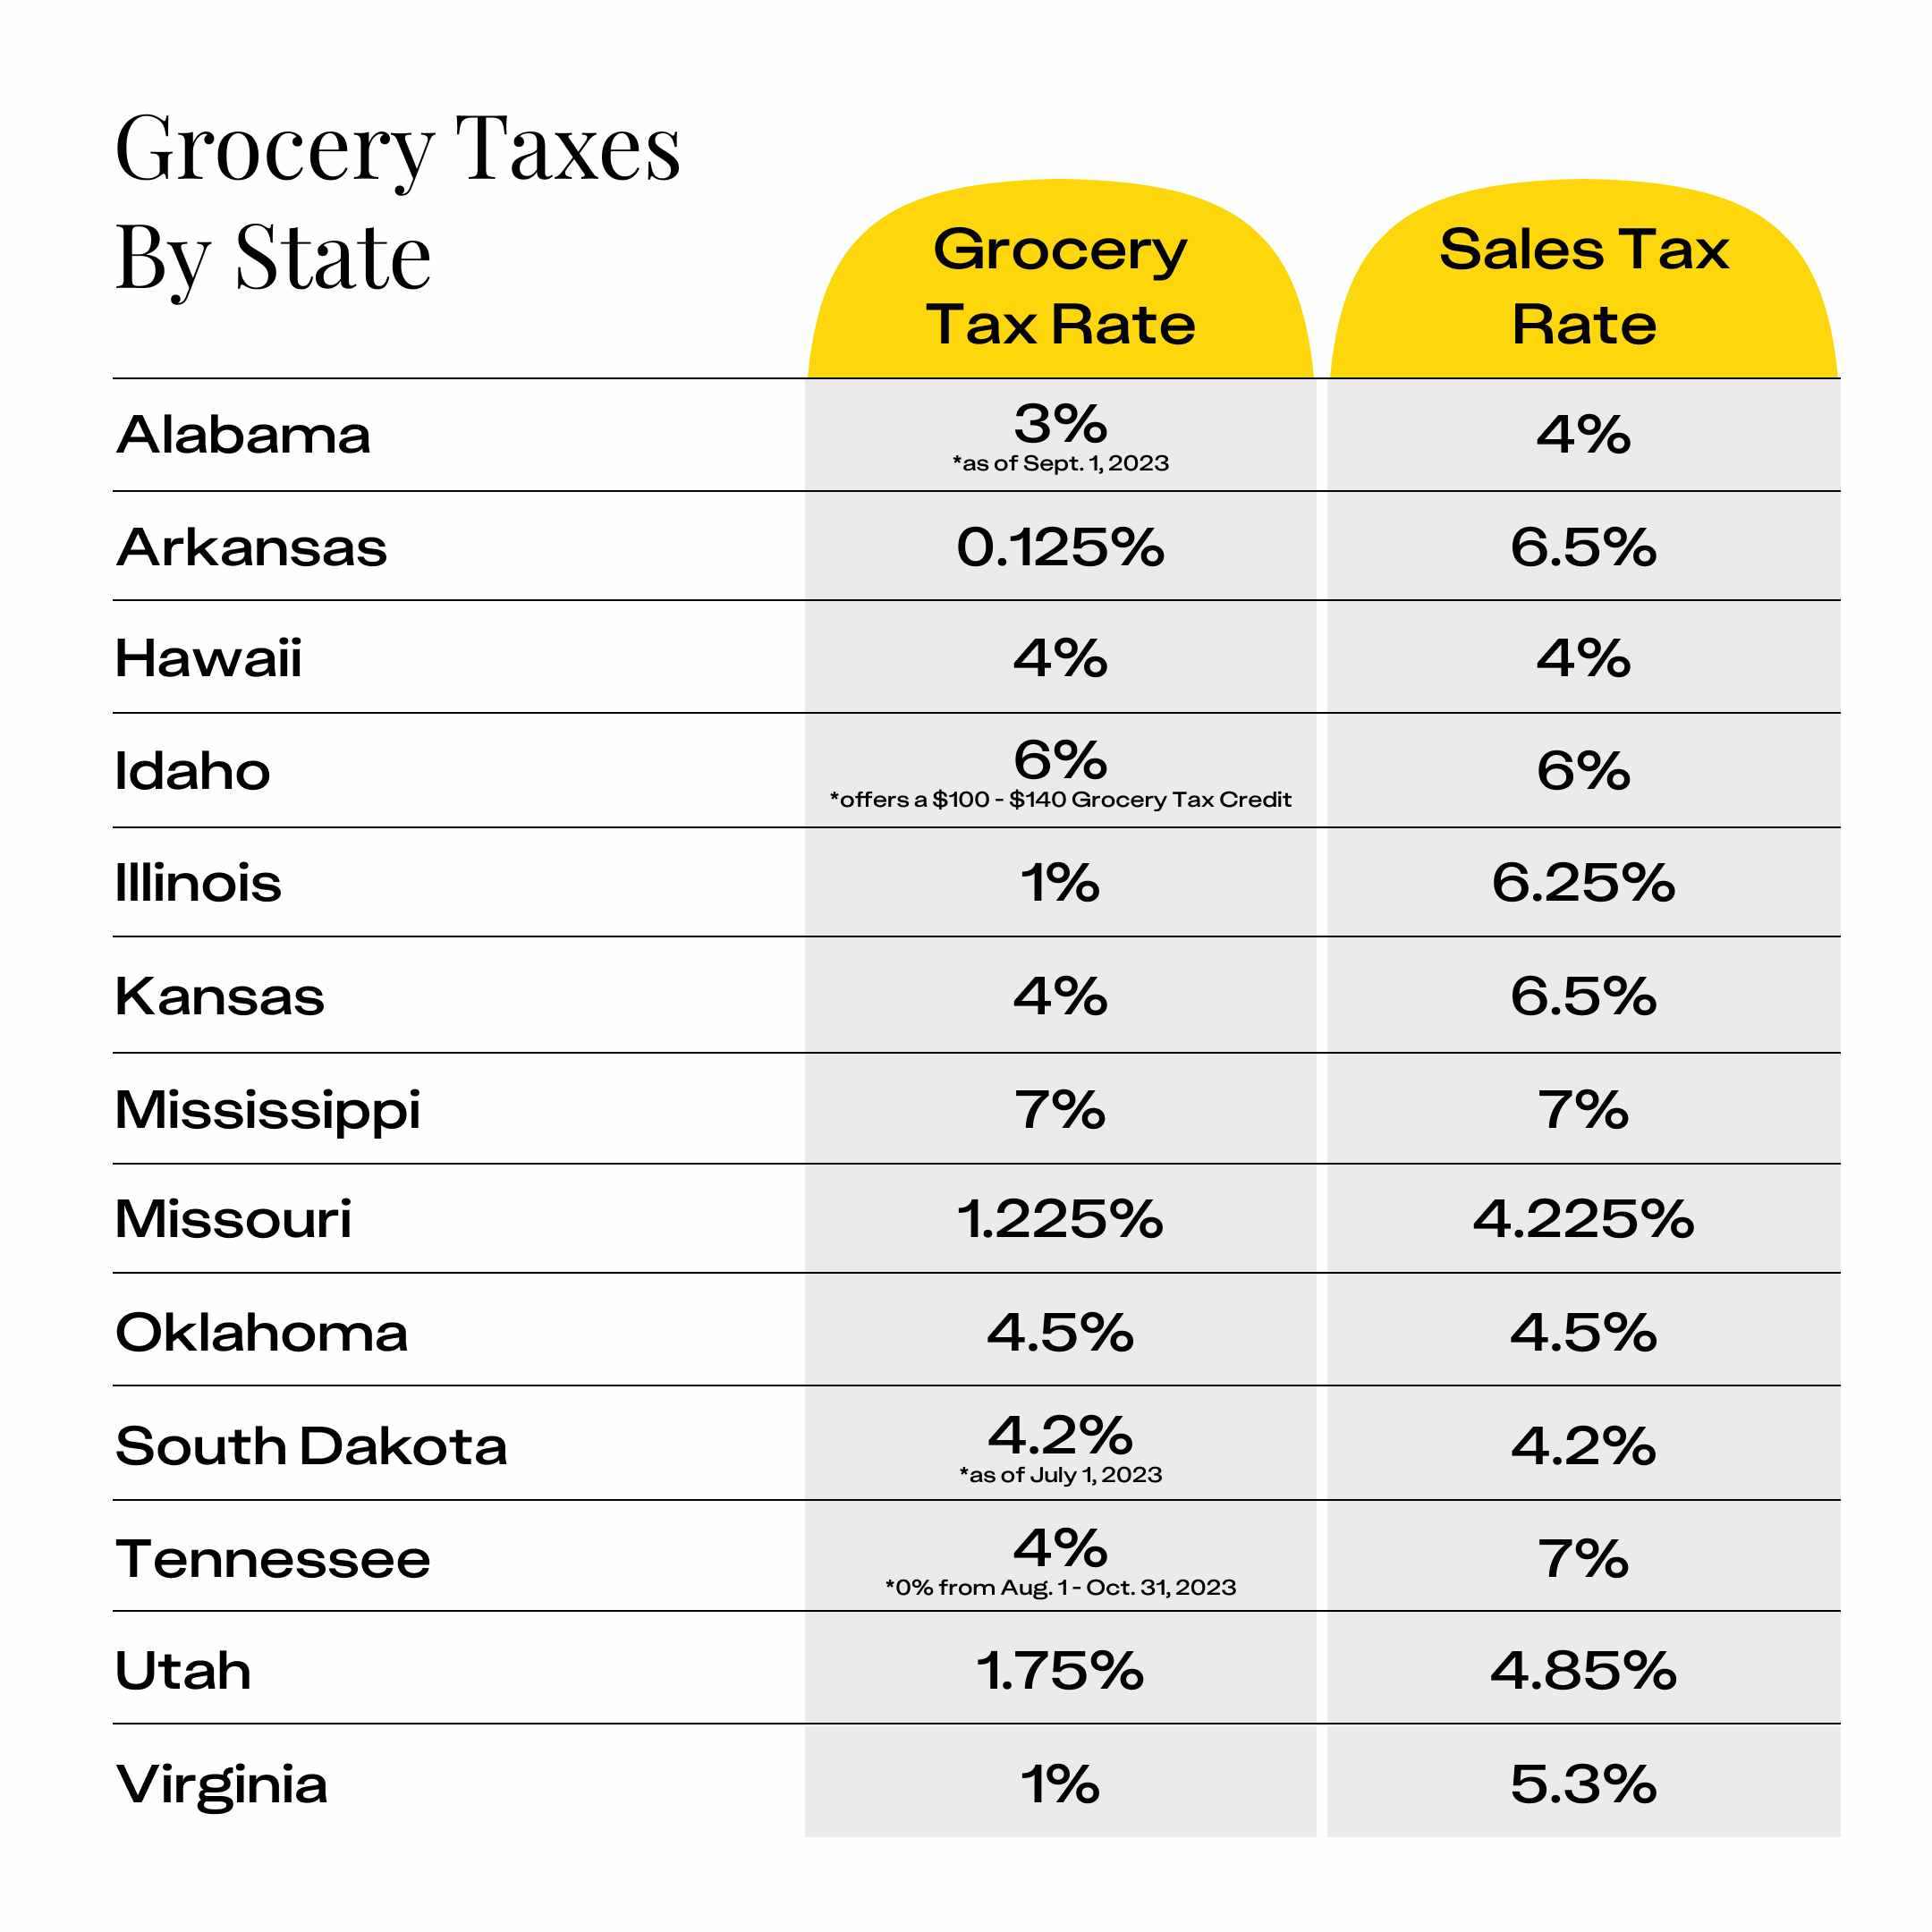 Chart showing the grocery tax by state for the 13 states that charge one.